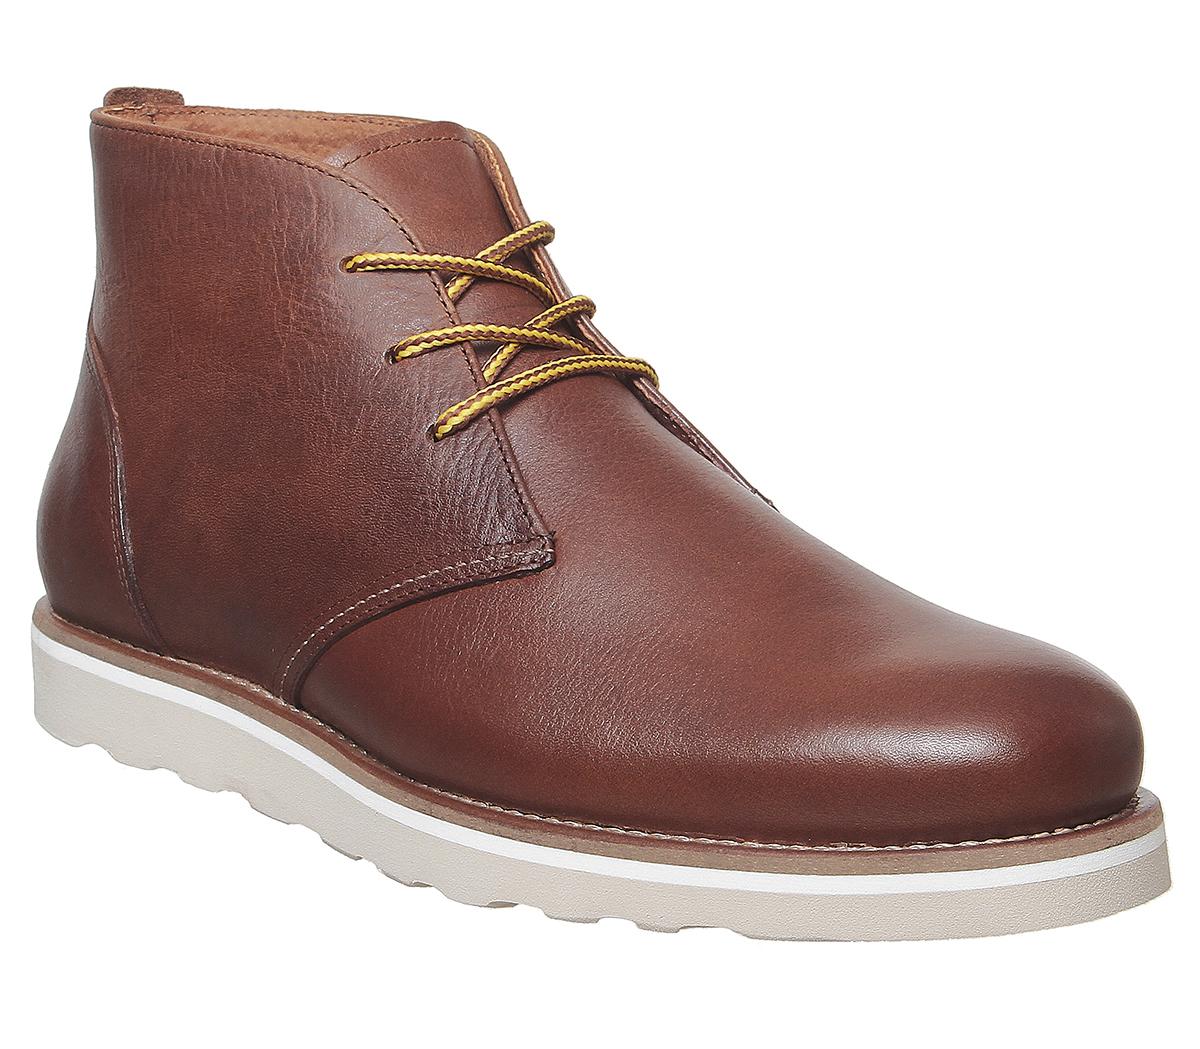 red chukka boots